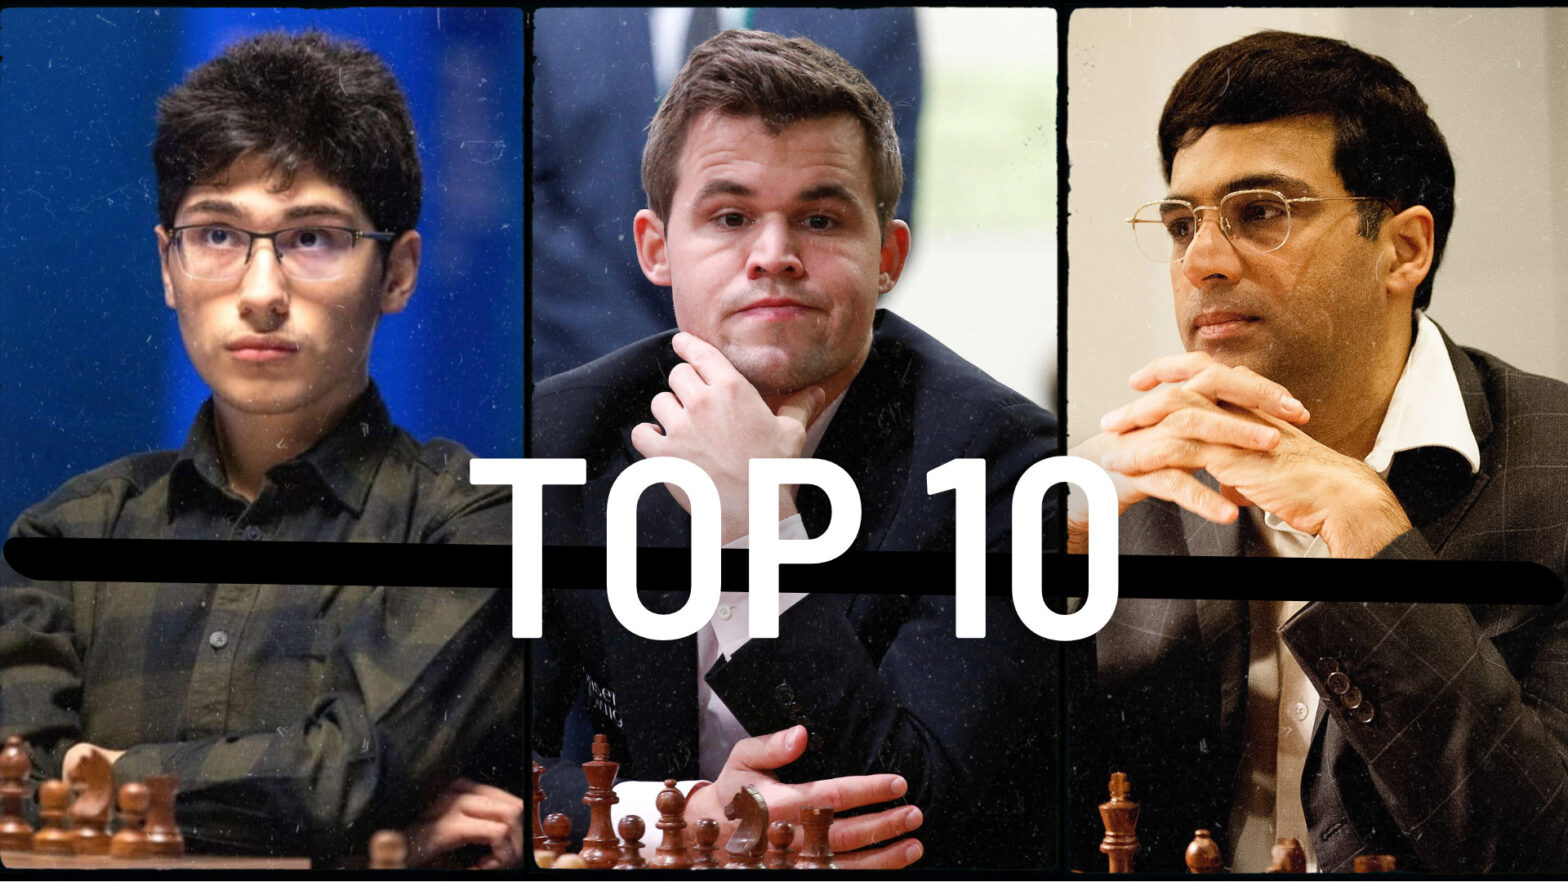 Top 10 greatest chess players of all time according to Opening Master